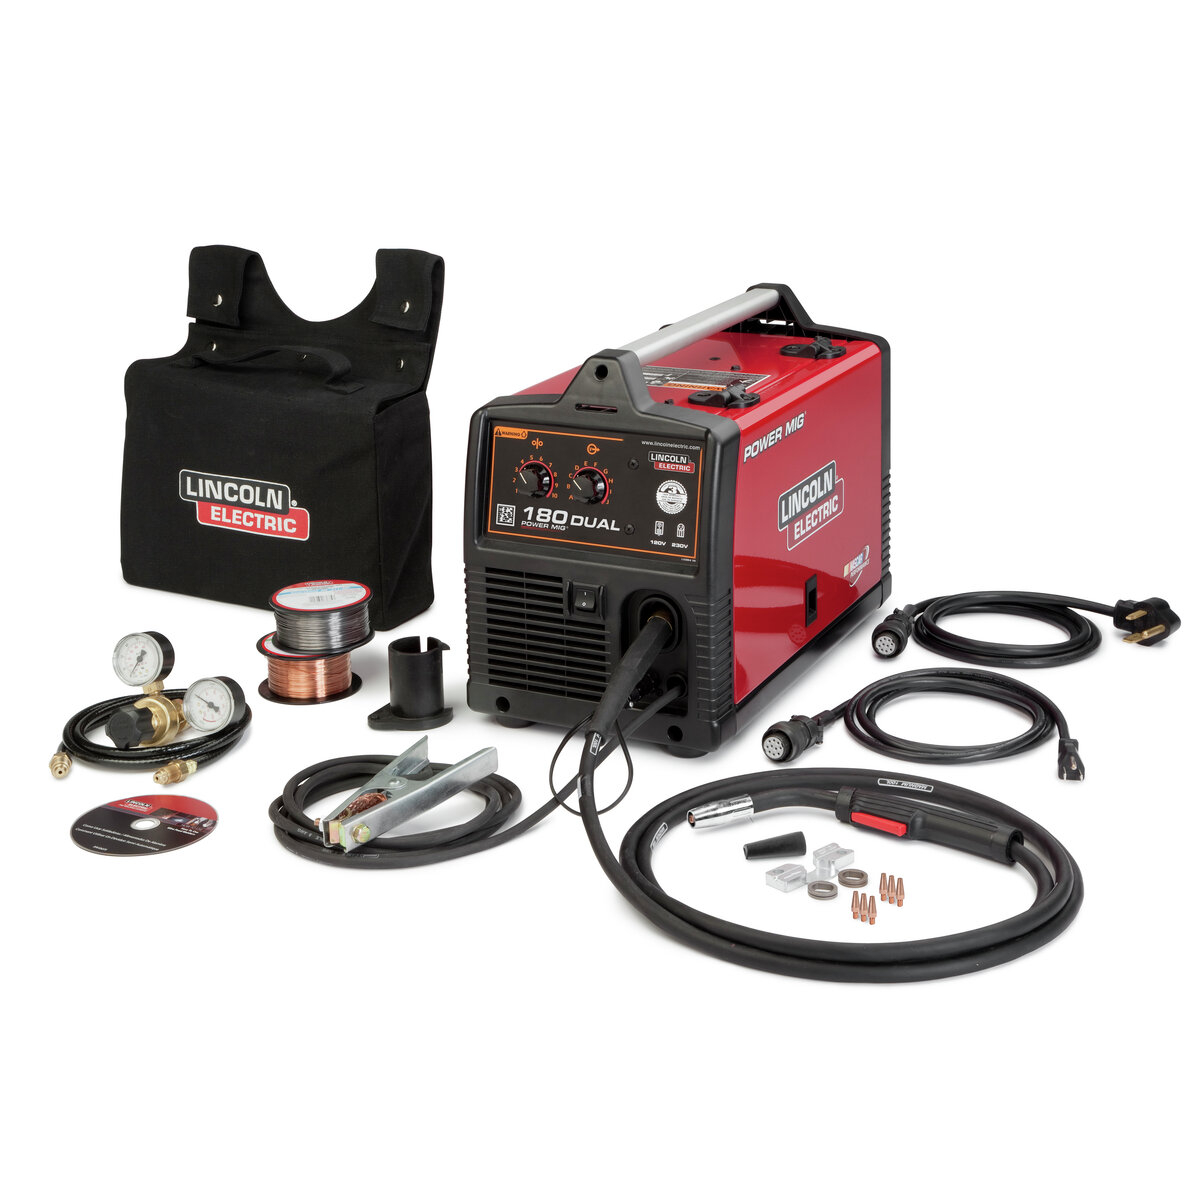 POWER MIG® 180 Dual MIG welder has dual 120 or 208/230 volt input power capability for MIG and flux cored wire welding.